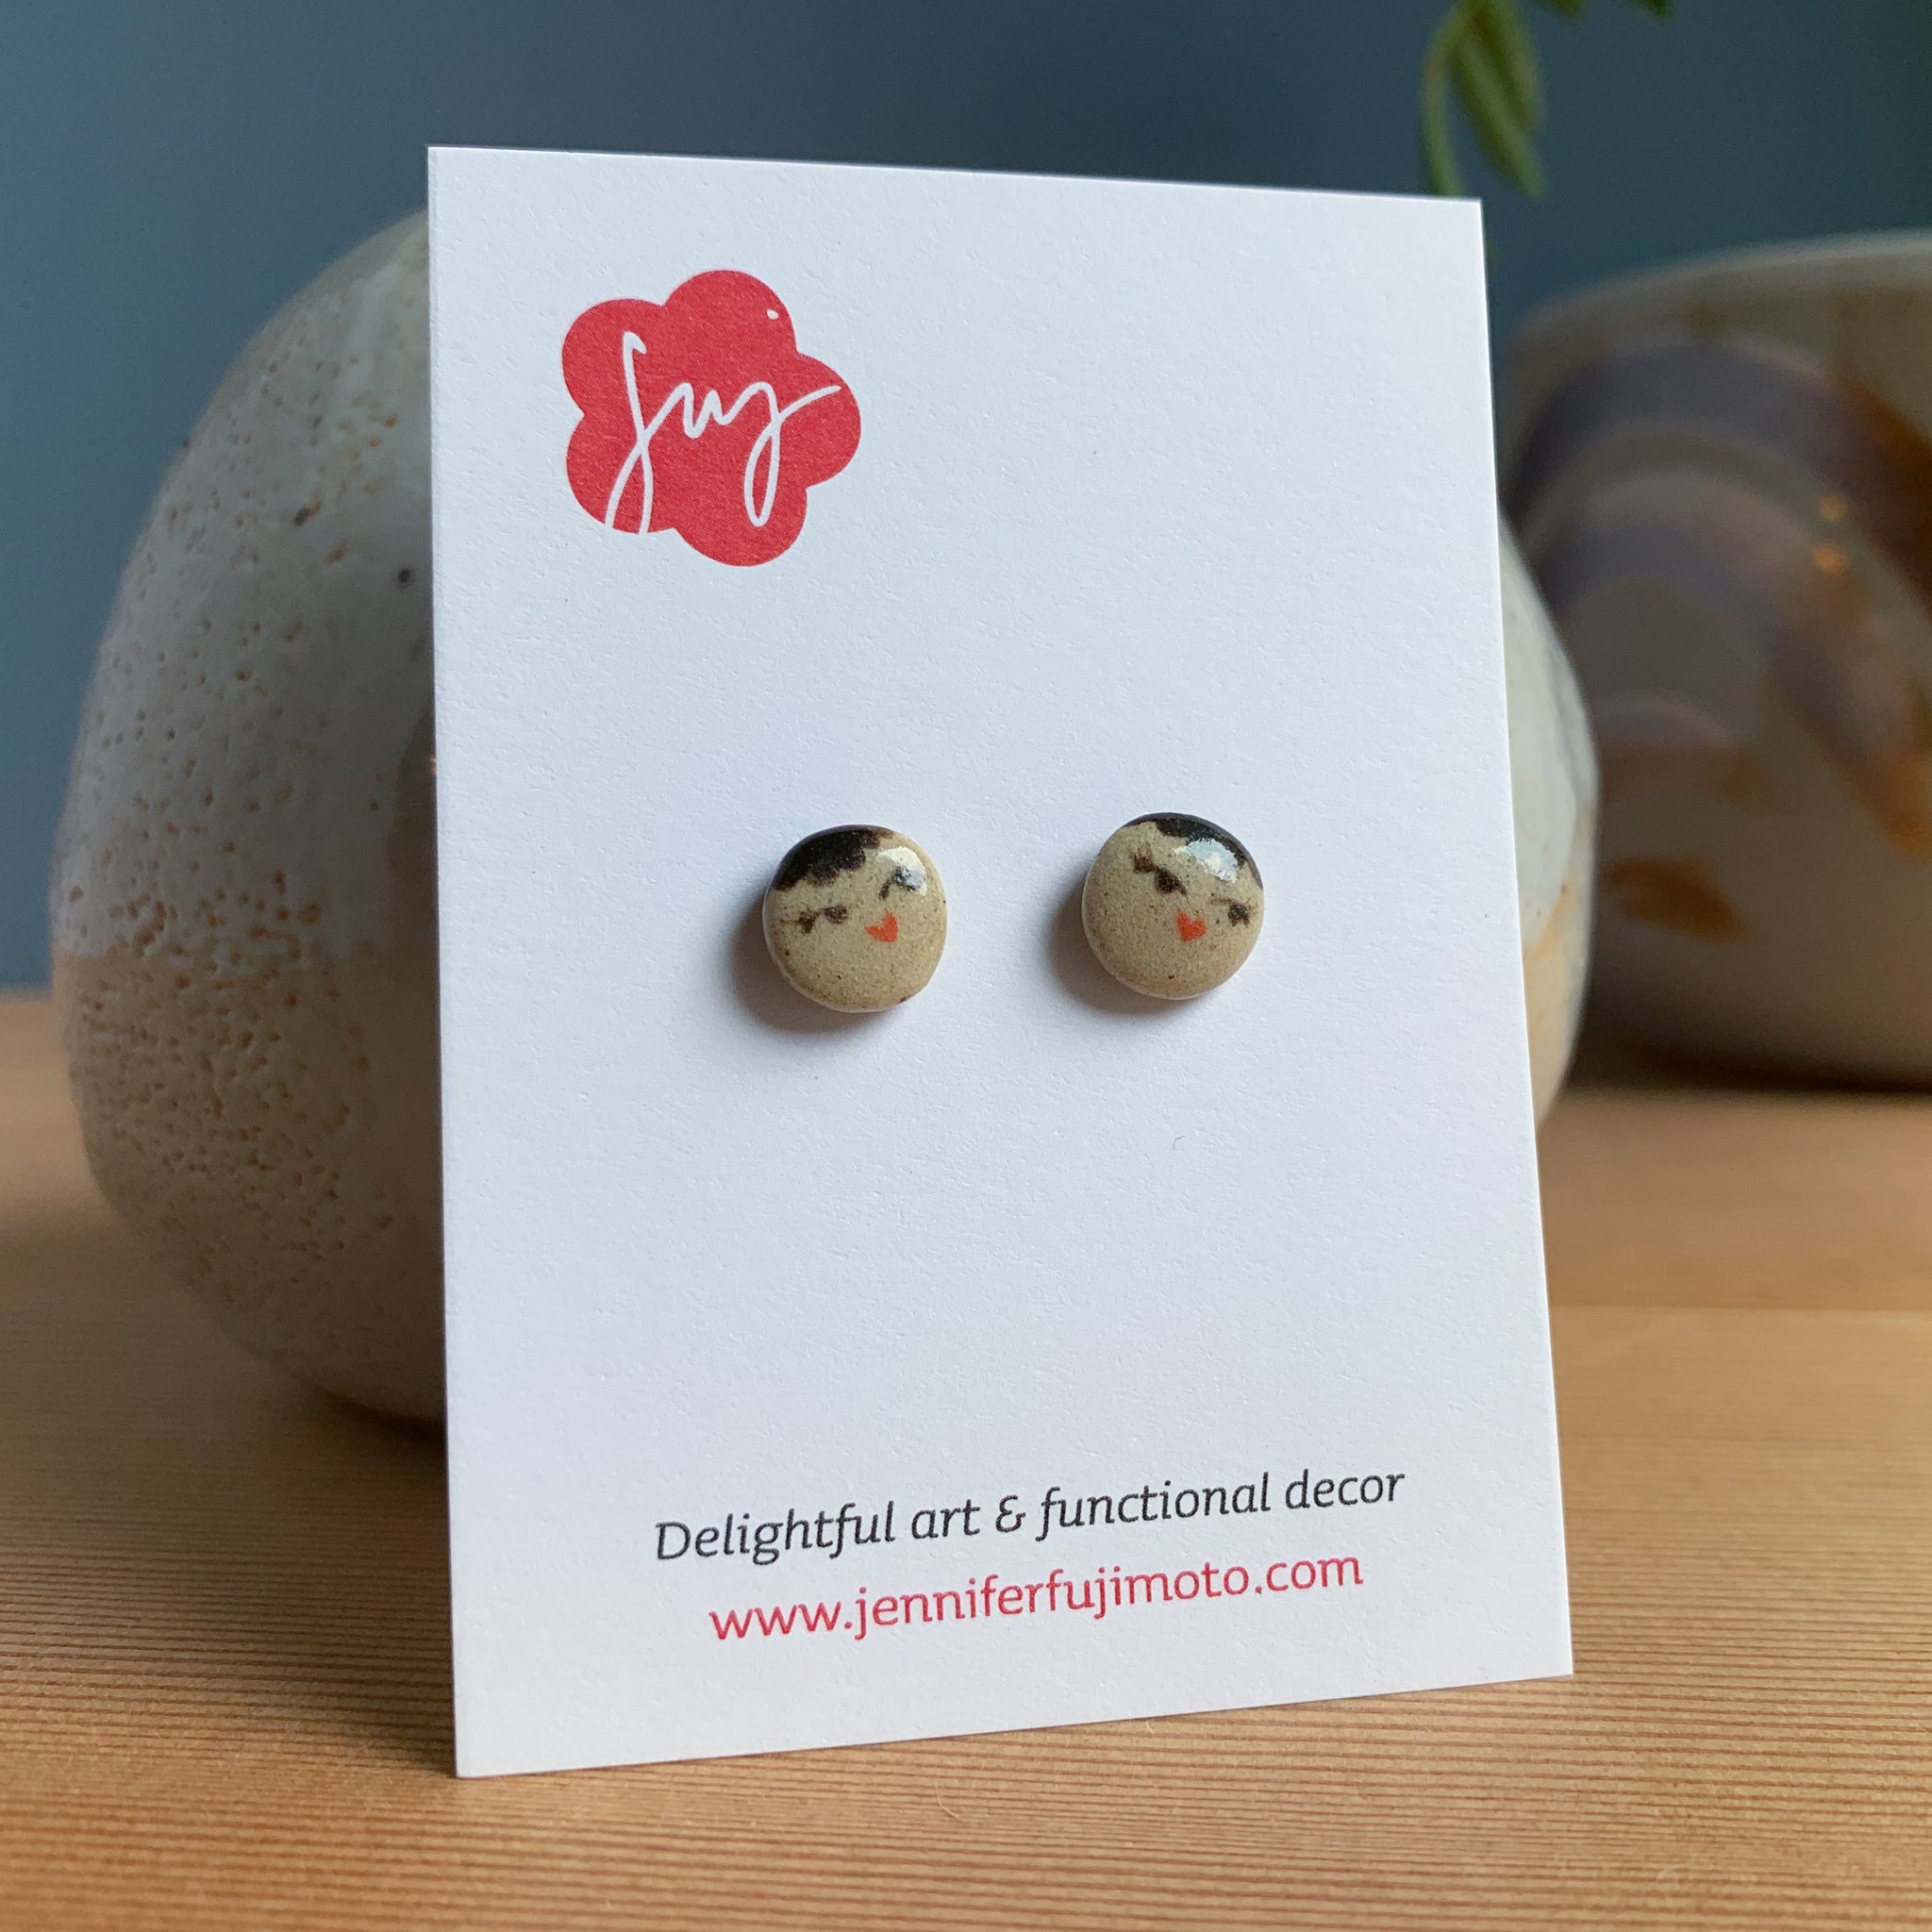 Ceramic earrings with cute coy expression on a backing card